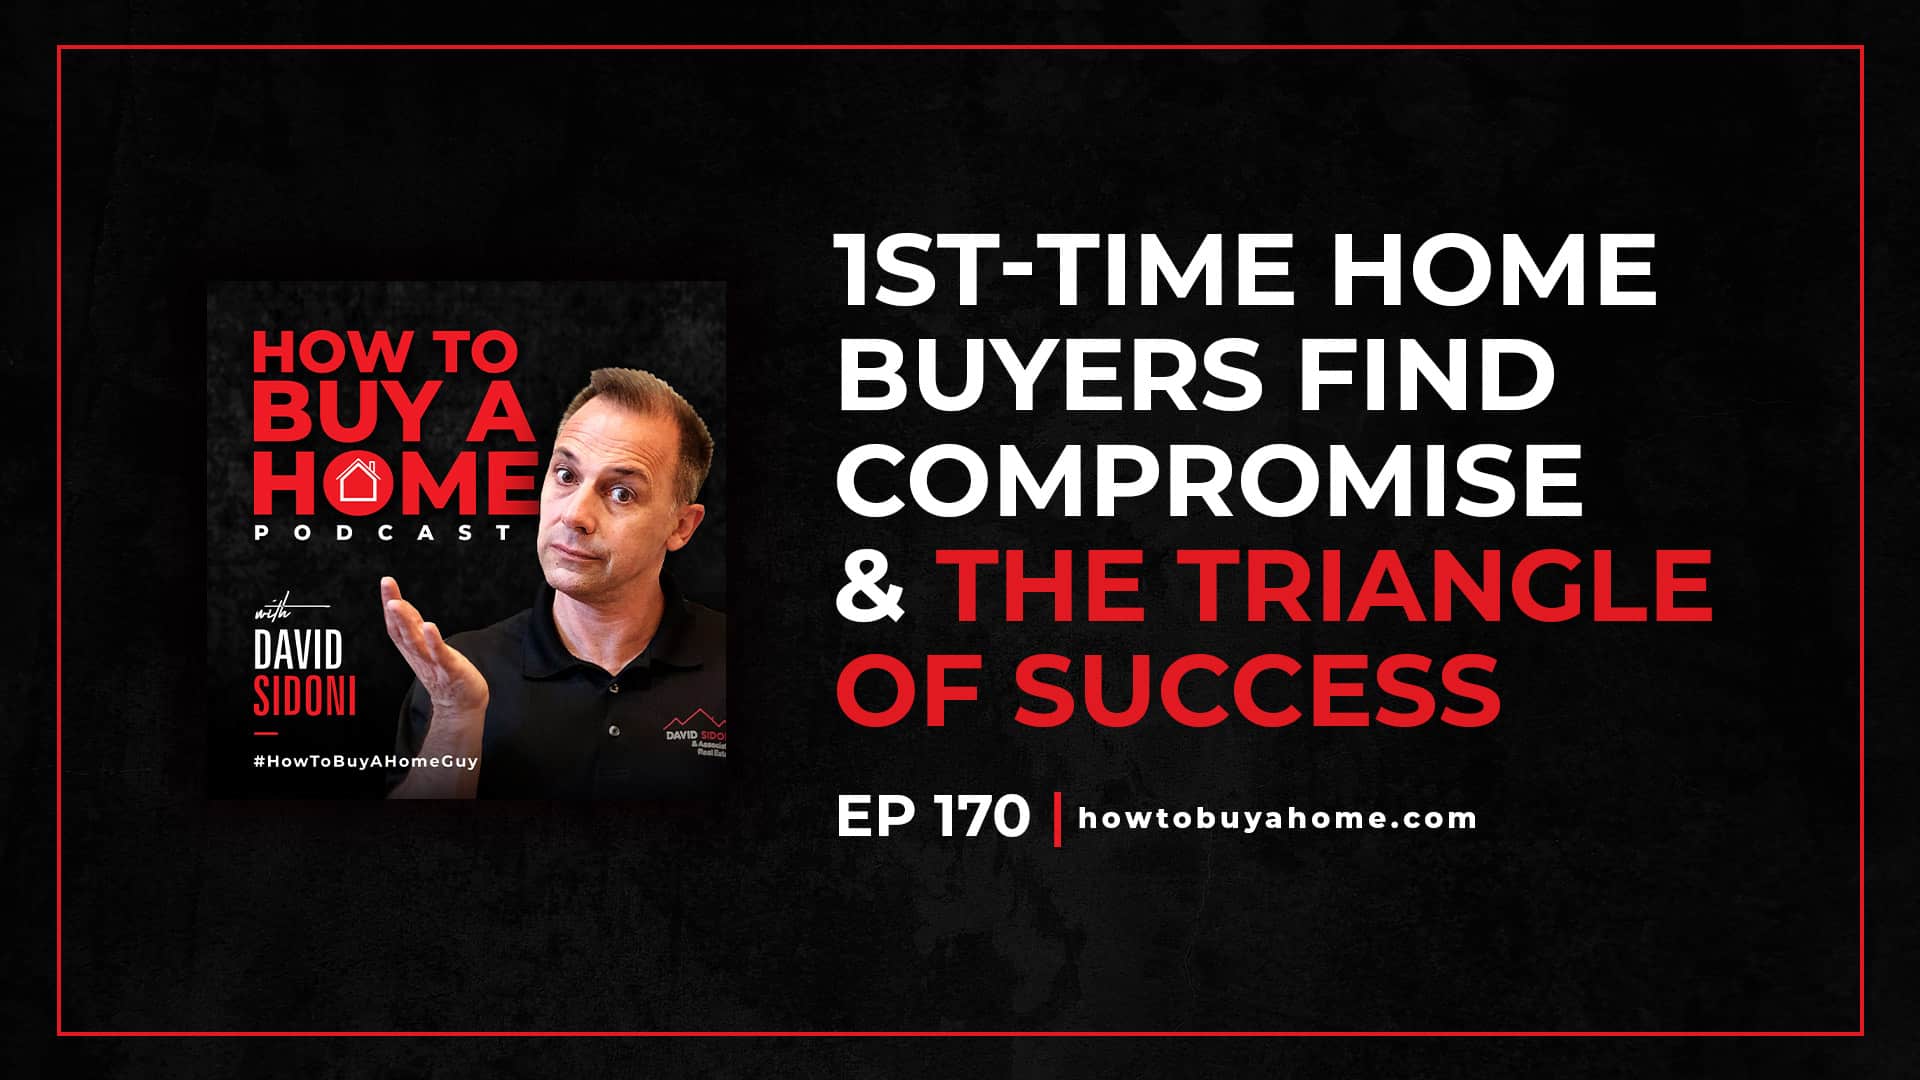 Ep. 170 – Interview 1st time home buyers find compromise & triangle of success